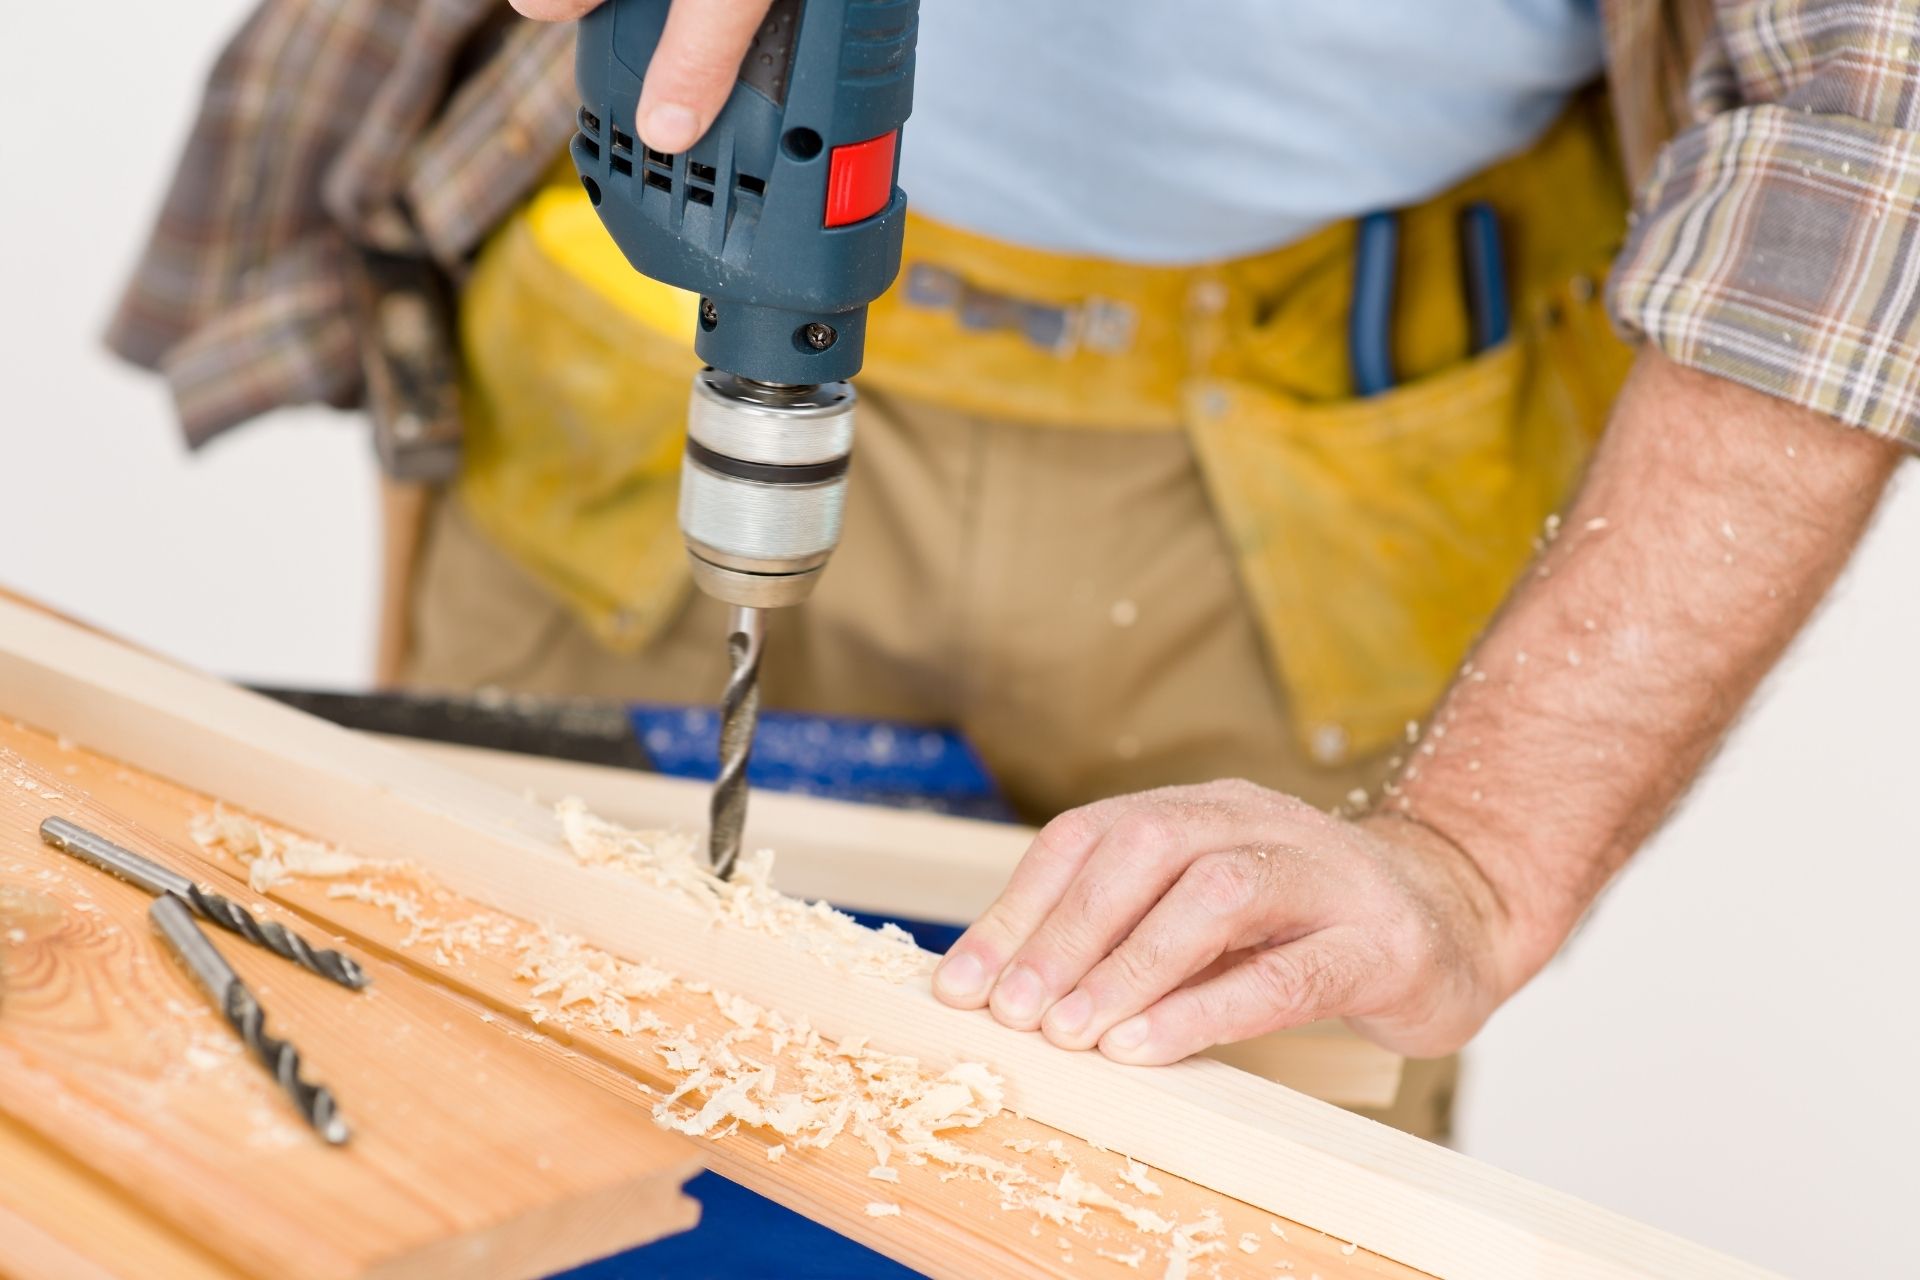 Diy Vs. Professional Handyman Services: Which Is Best For Your Home Project?